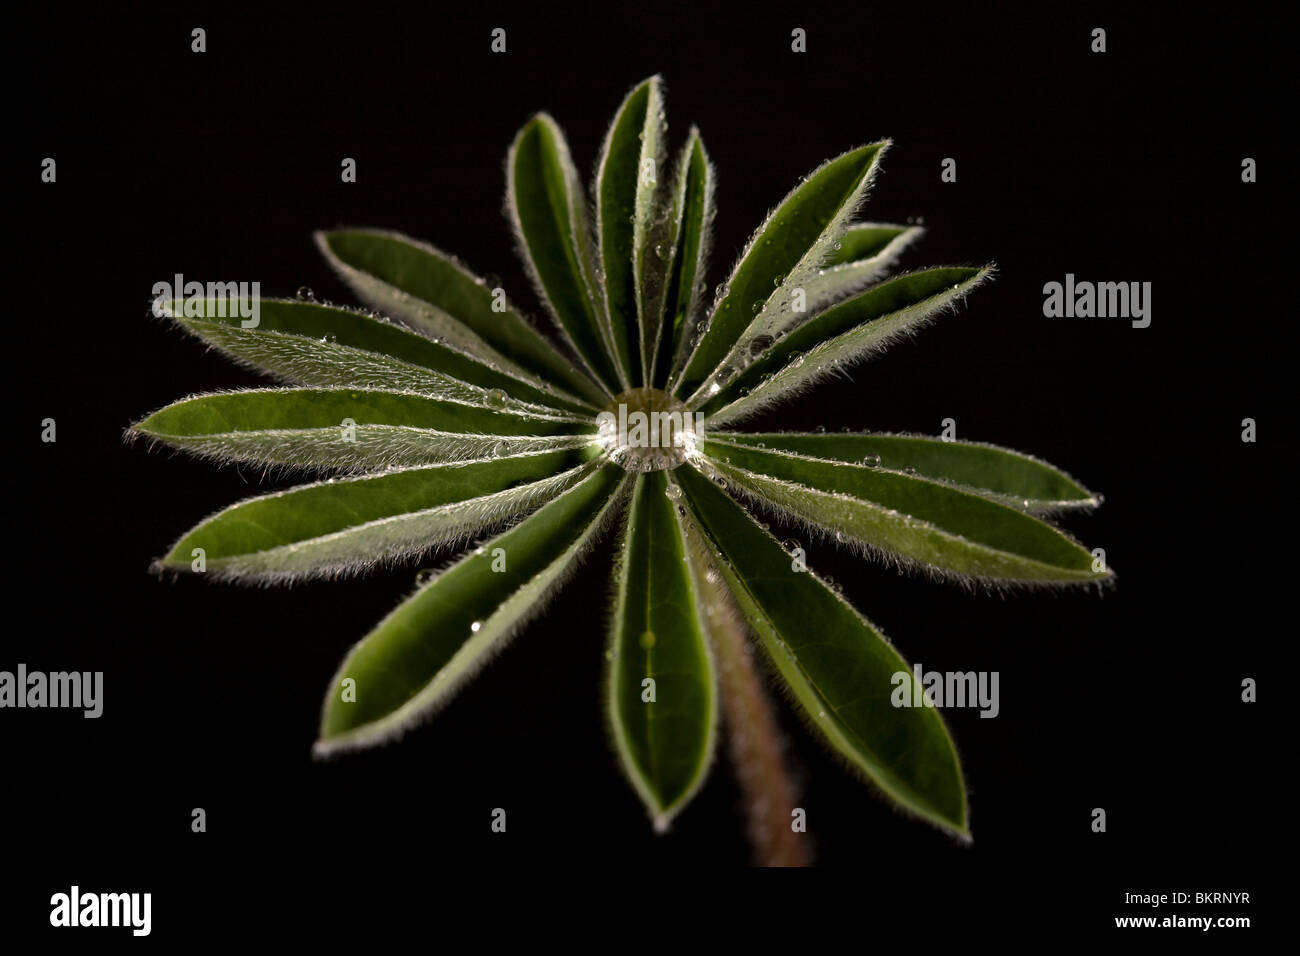 Young sheet of a plant covered with dew on a black background. Stock Photo